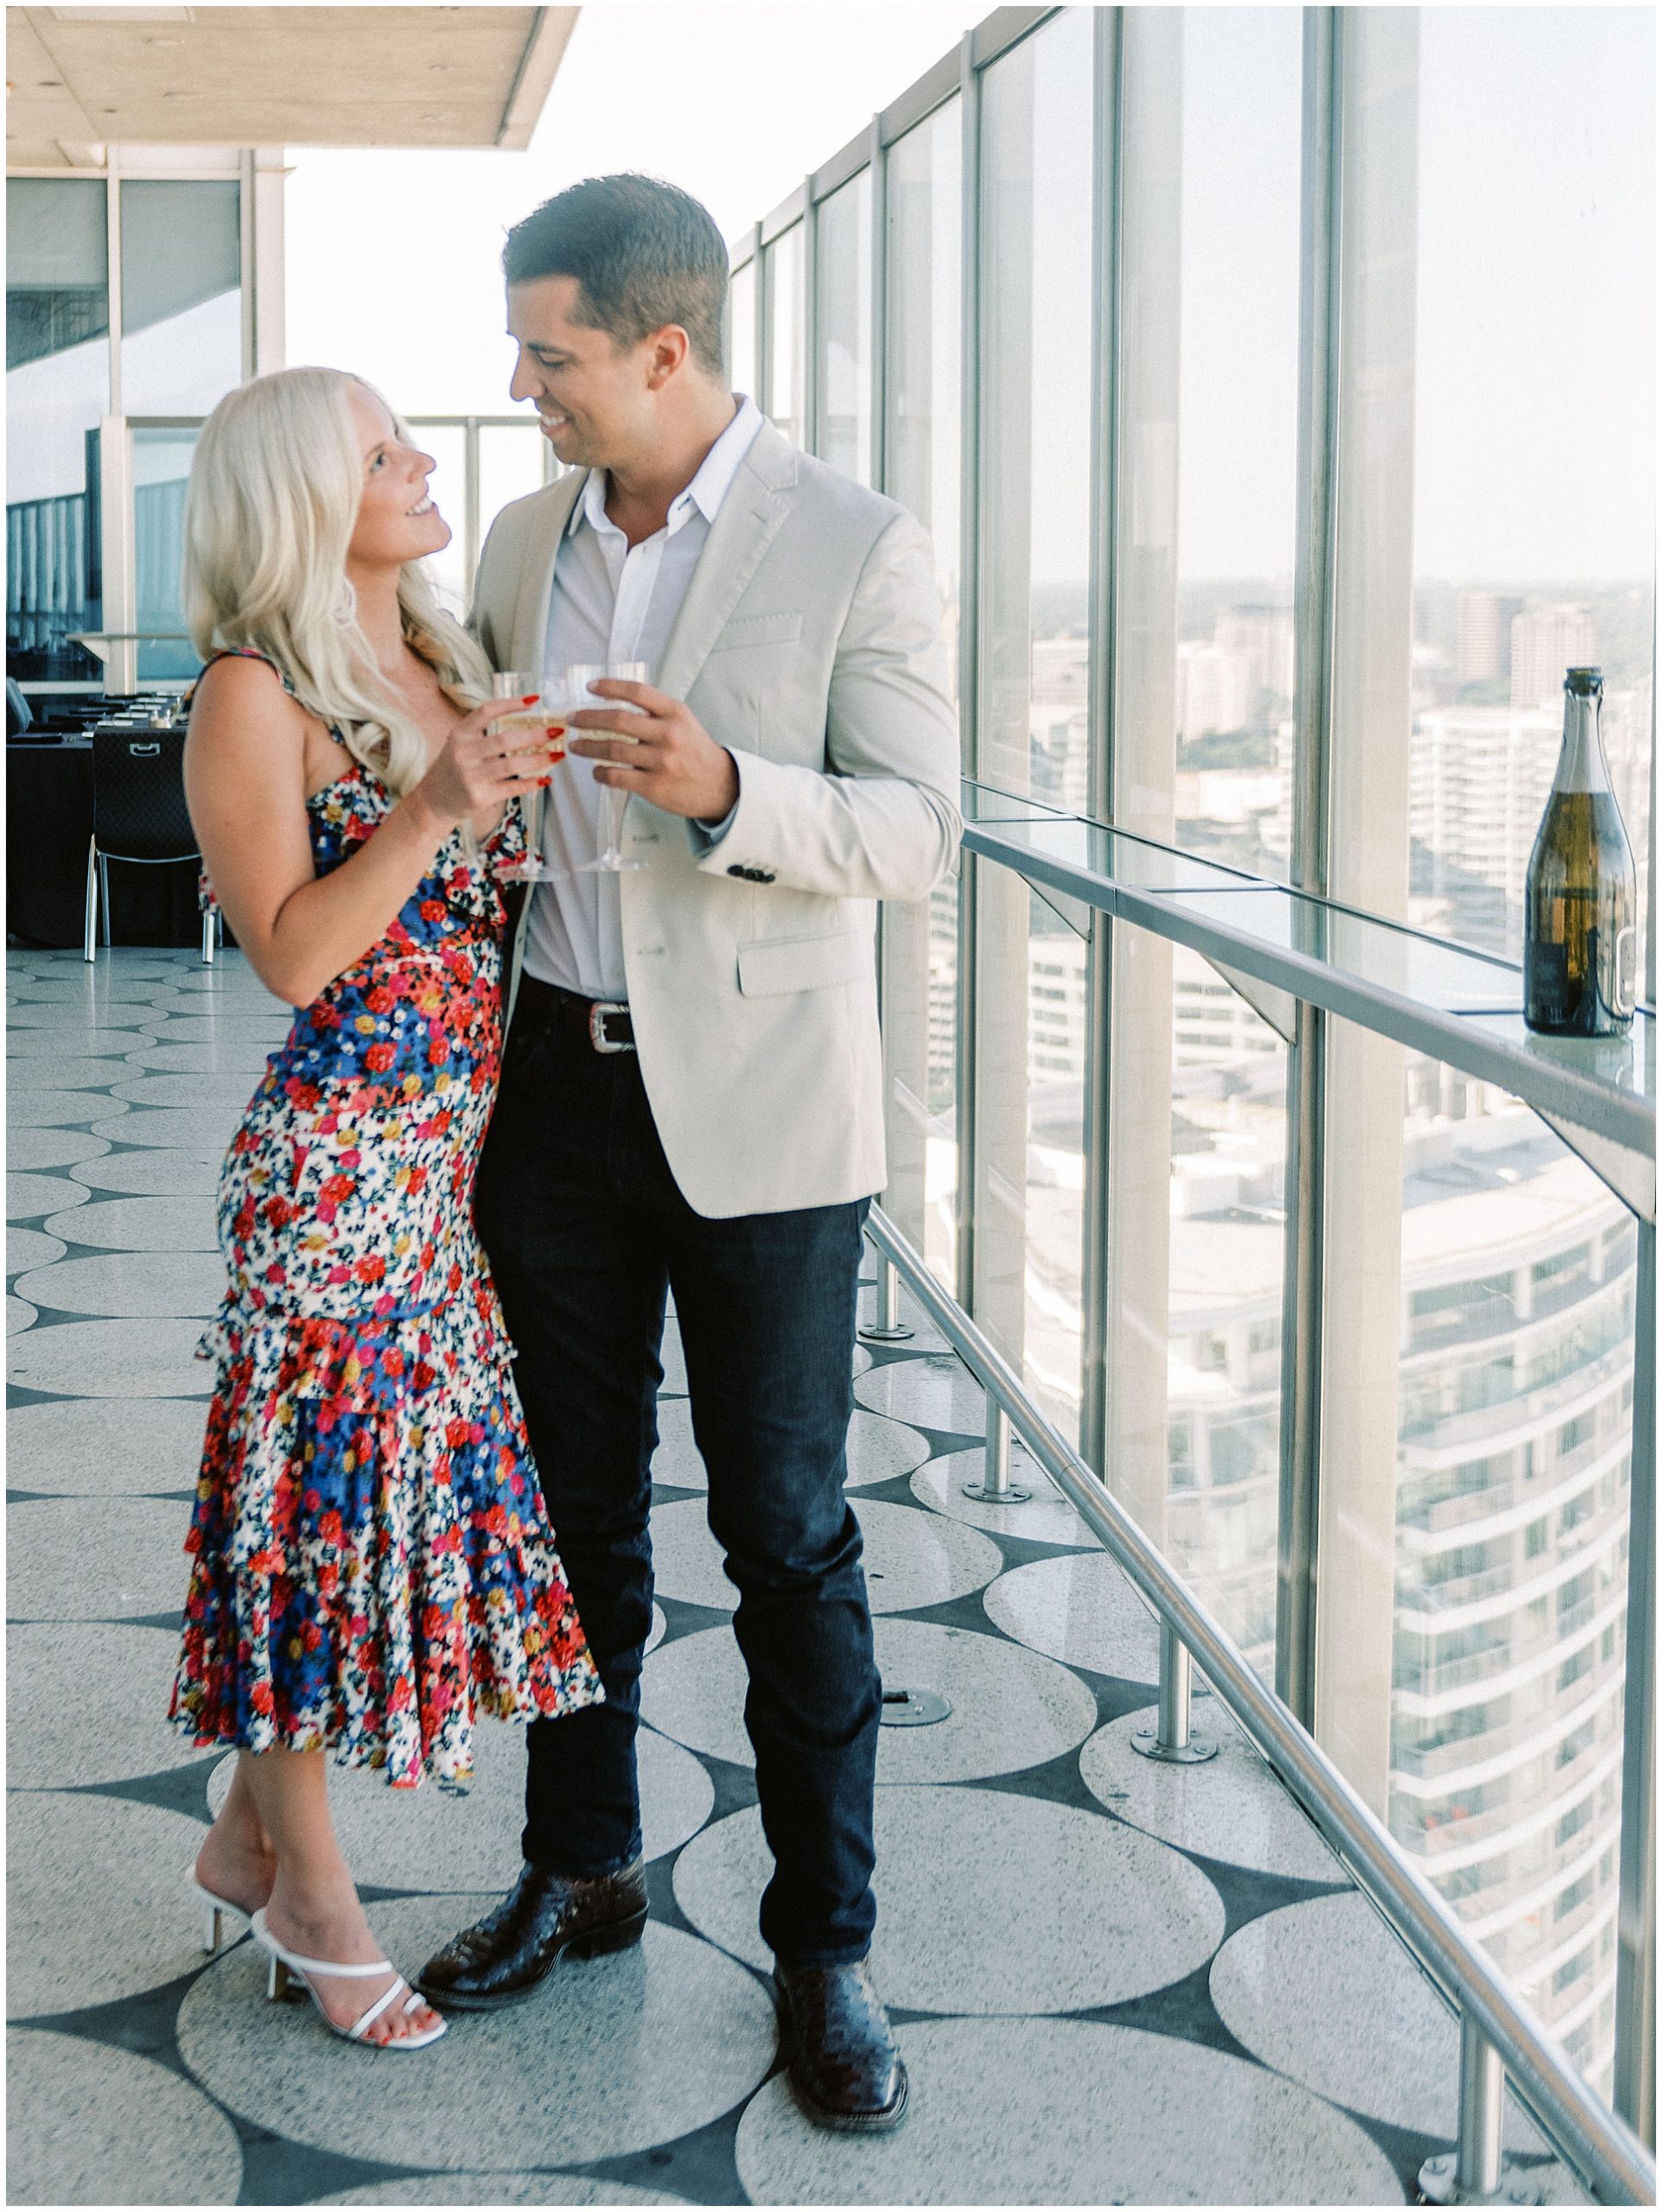 Engagement proposal at The W Hotel in Dallas